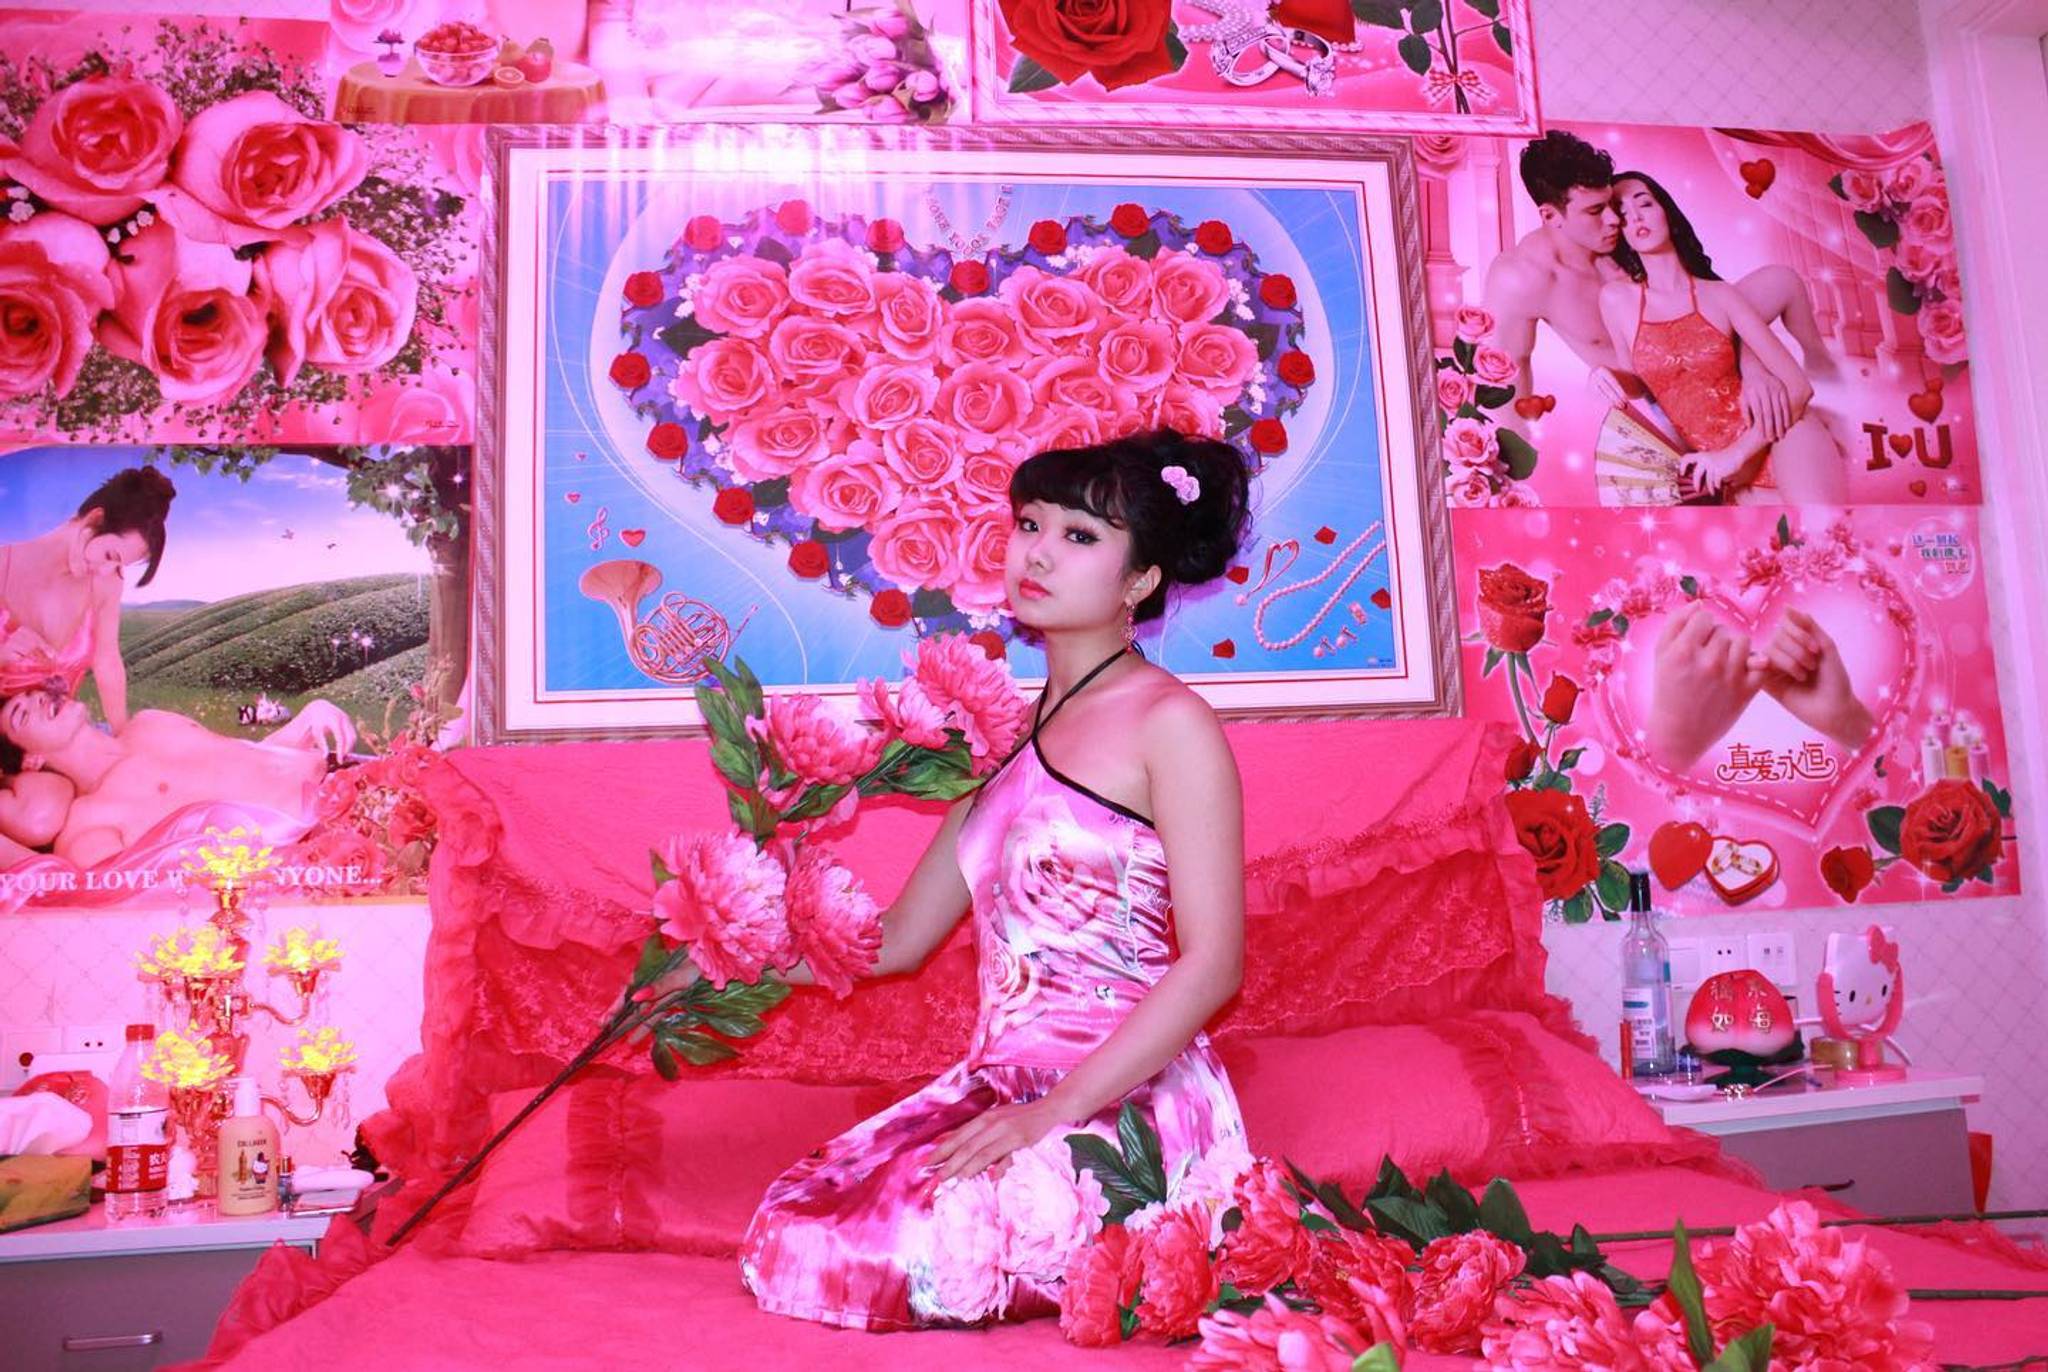 Why are Chinese youth embracing tastelessness?